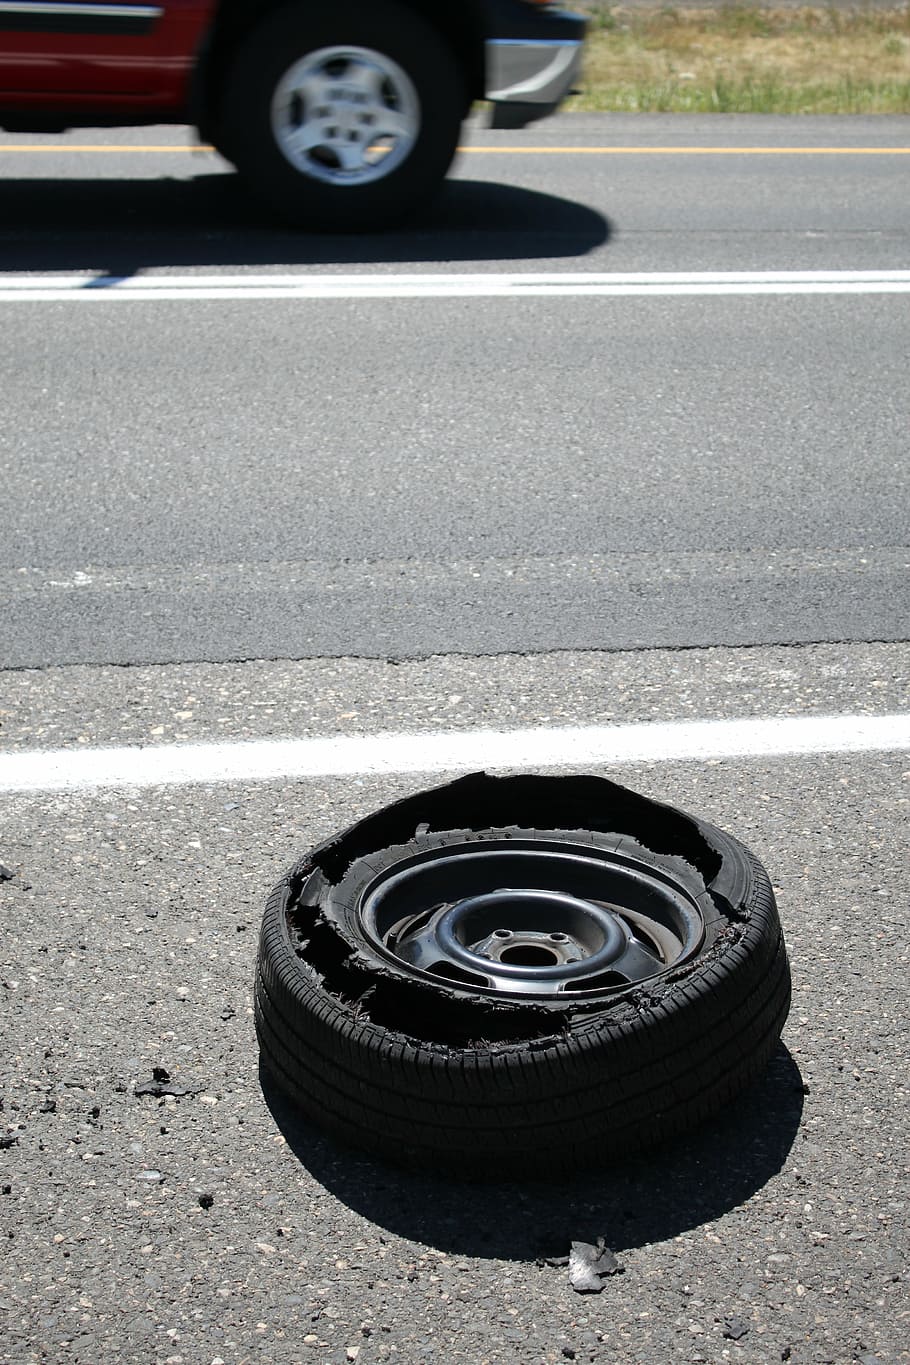 stripped, vehicle tire, road, blowout, tire, wheel, rubber, flat, tyre, car